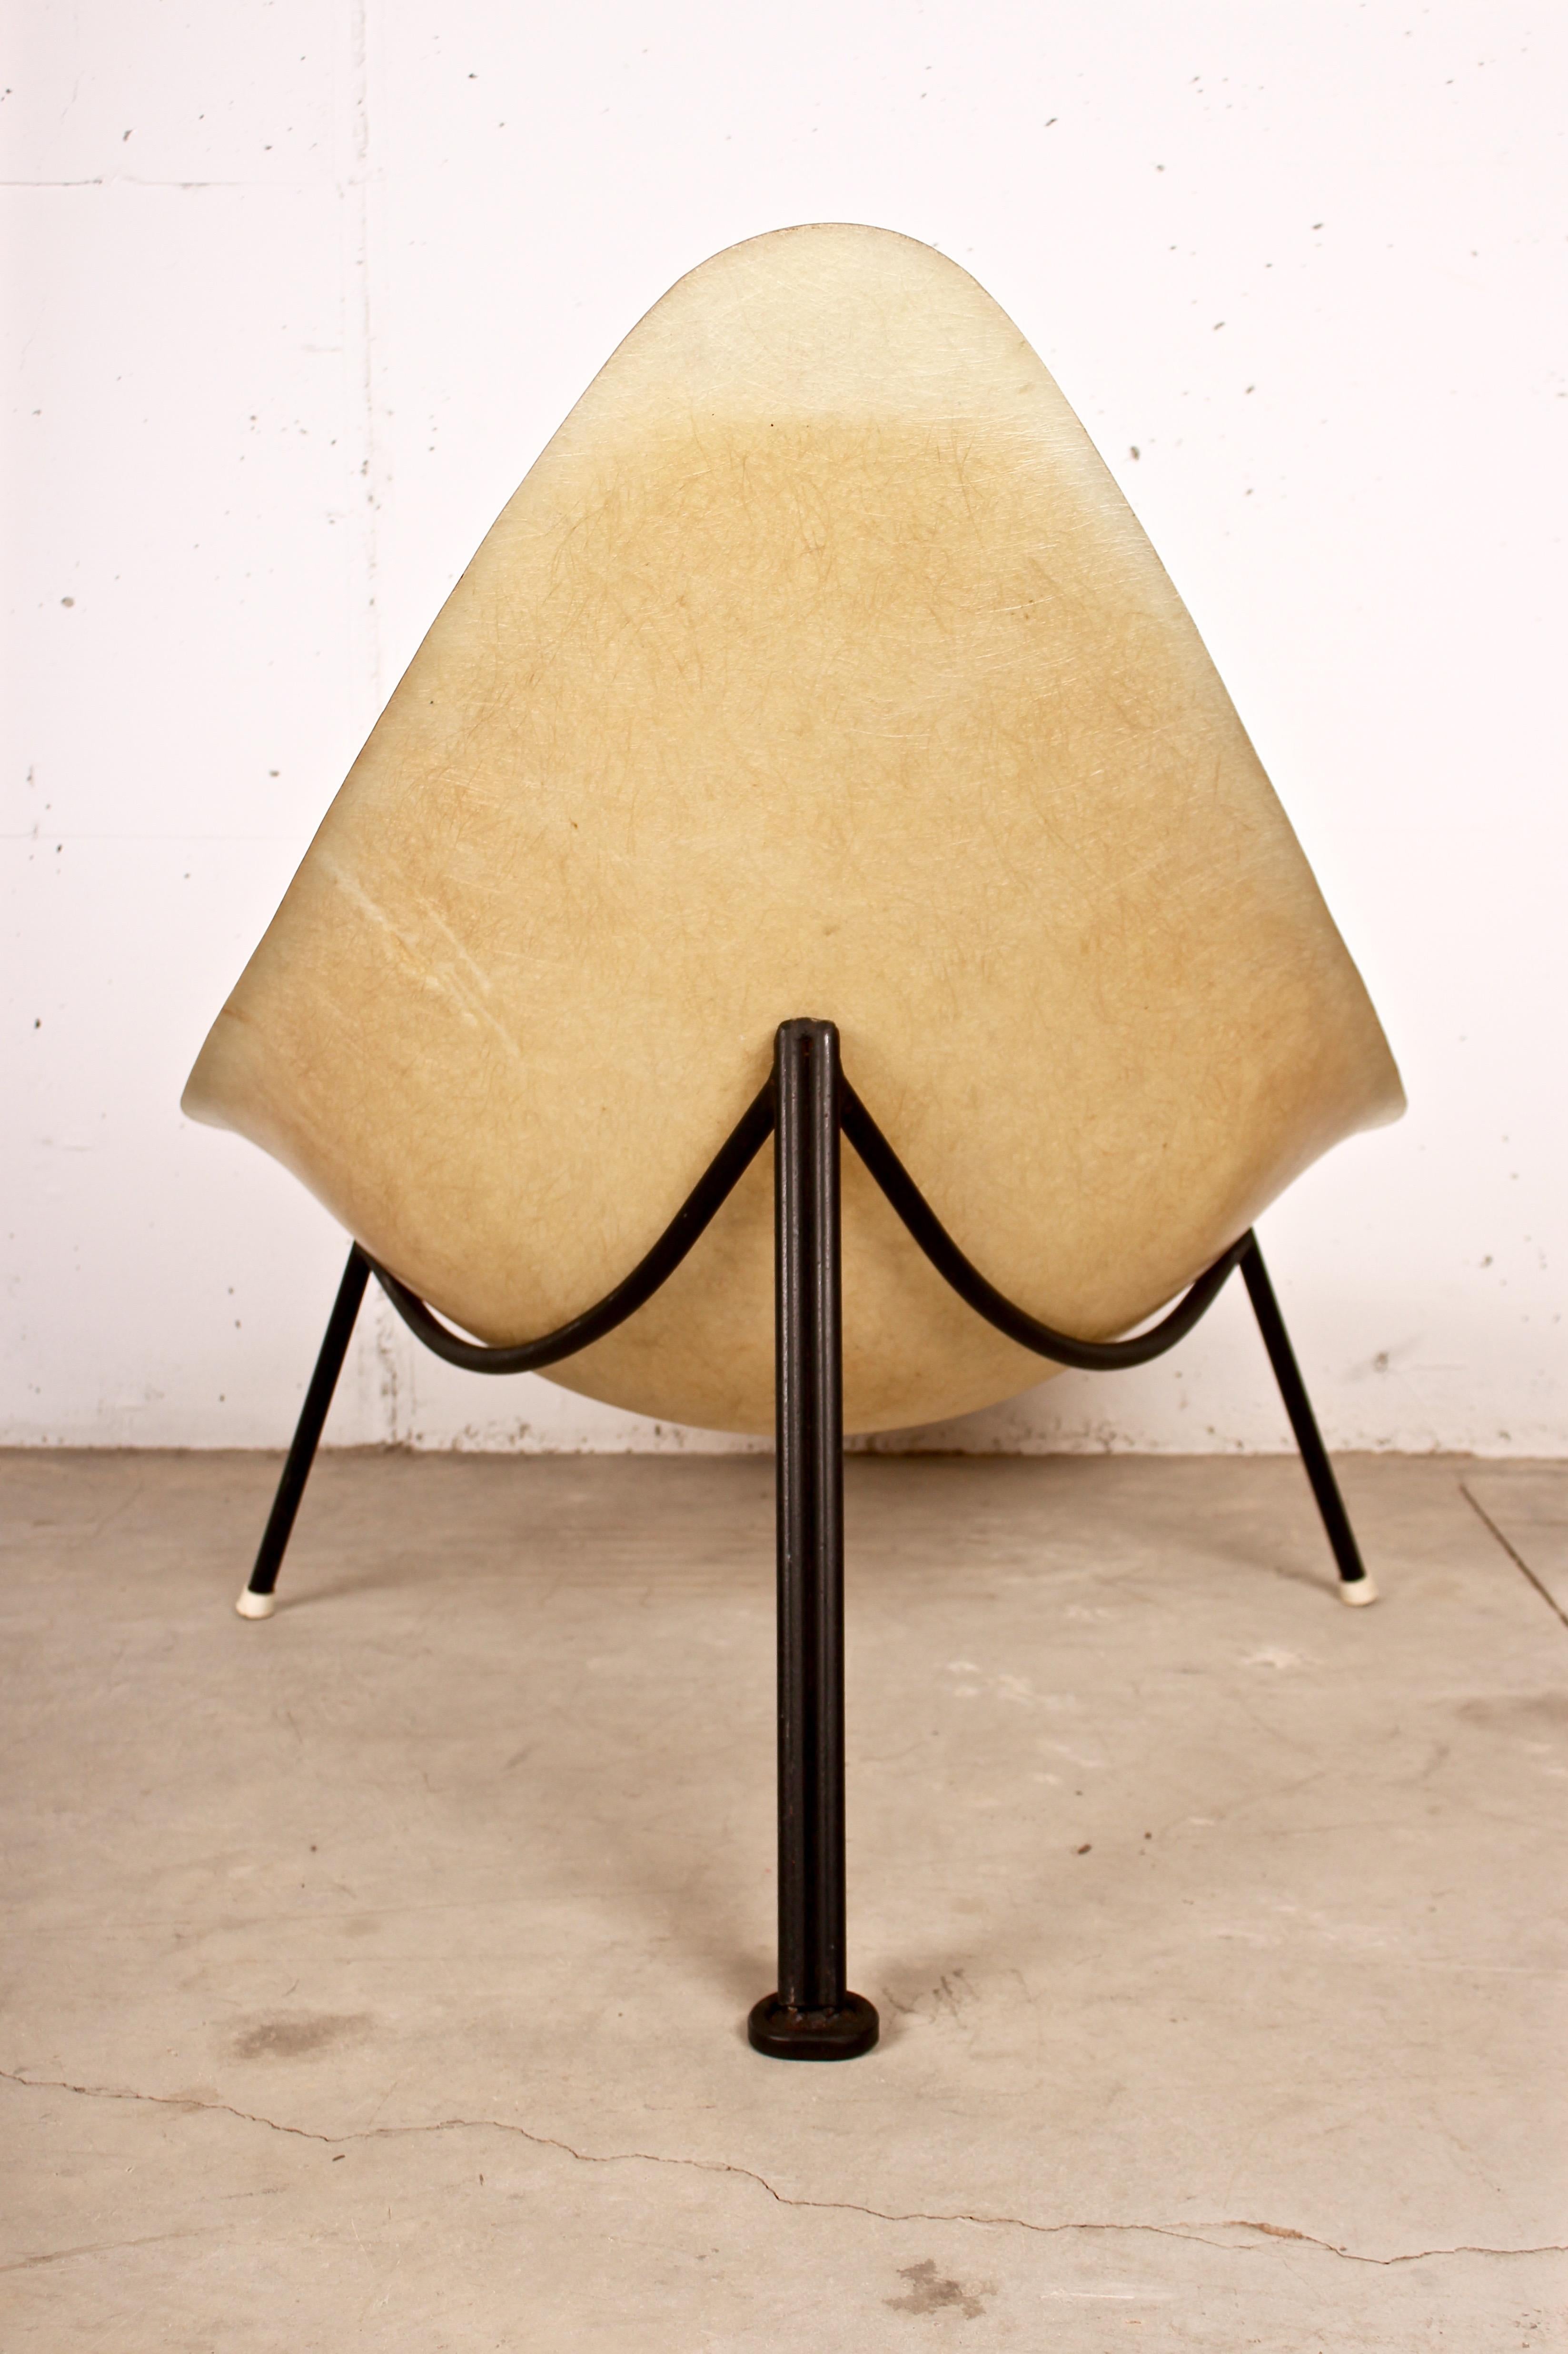 Mérat Early French Fiberglass Easy Chair Attributed to Rj Caillette France, 1956 1